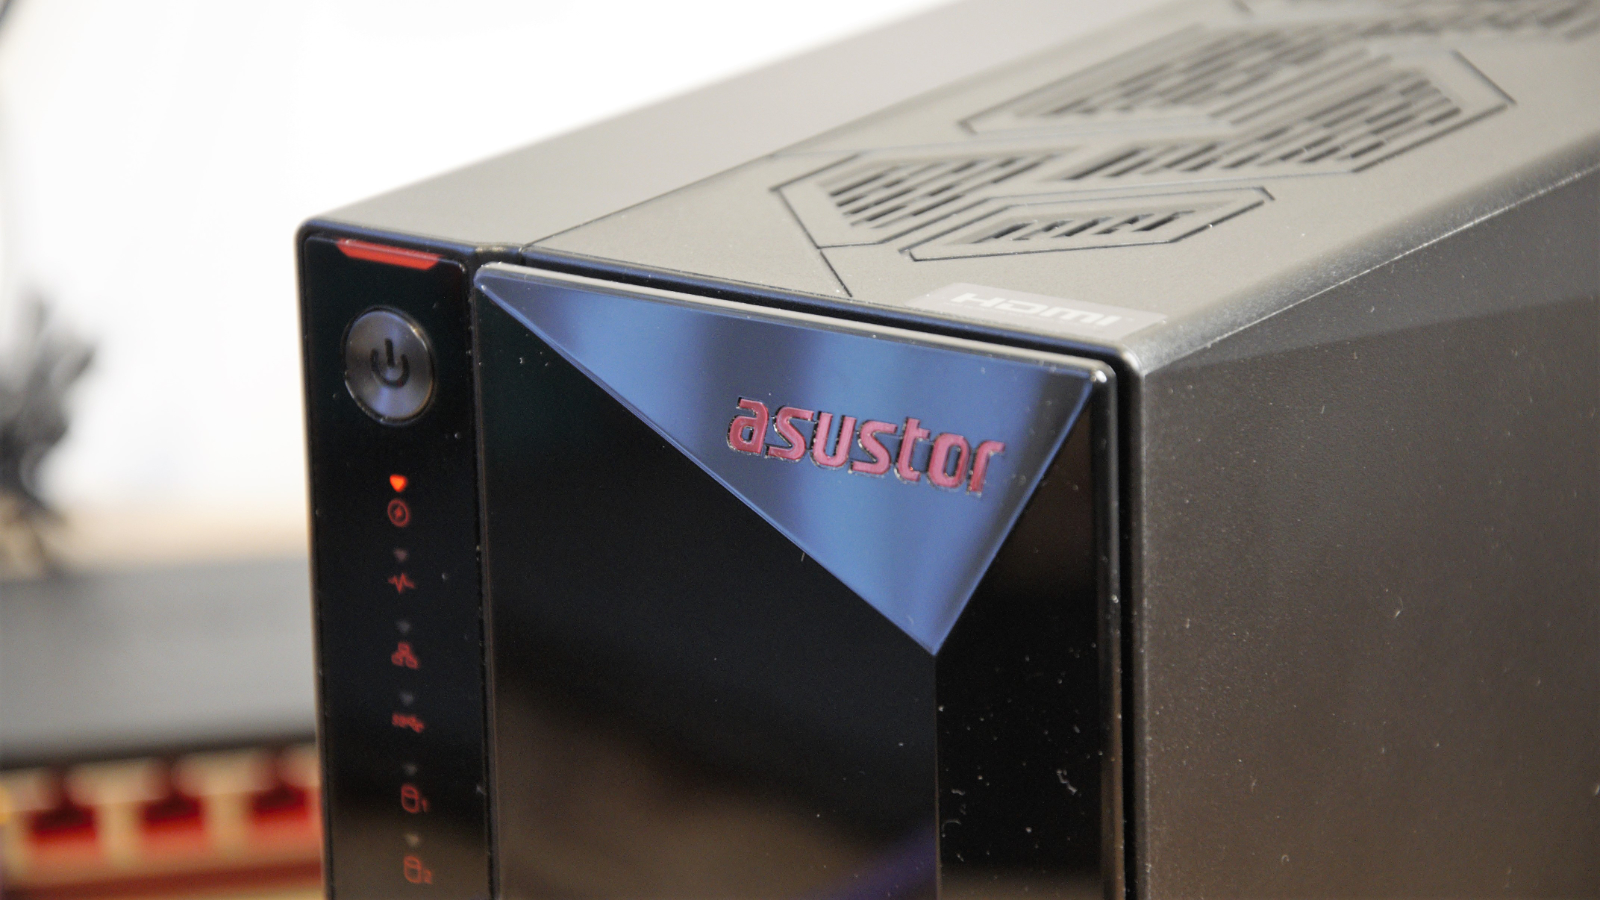 Asustor Nimbustor 2 Gen2 AS5402T Review: Redesigned From the